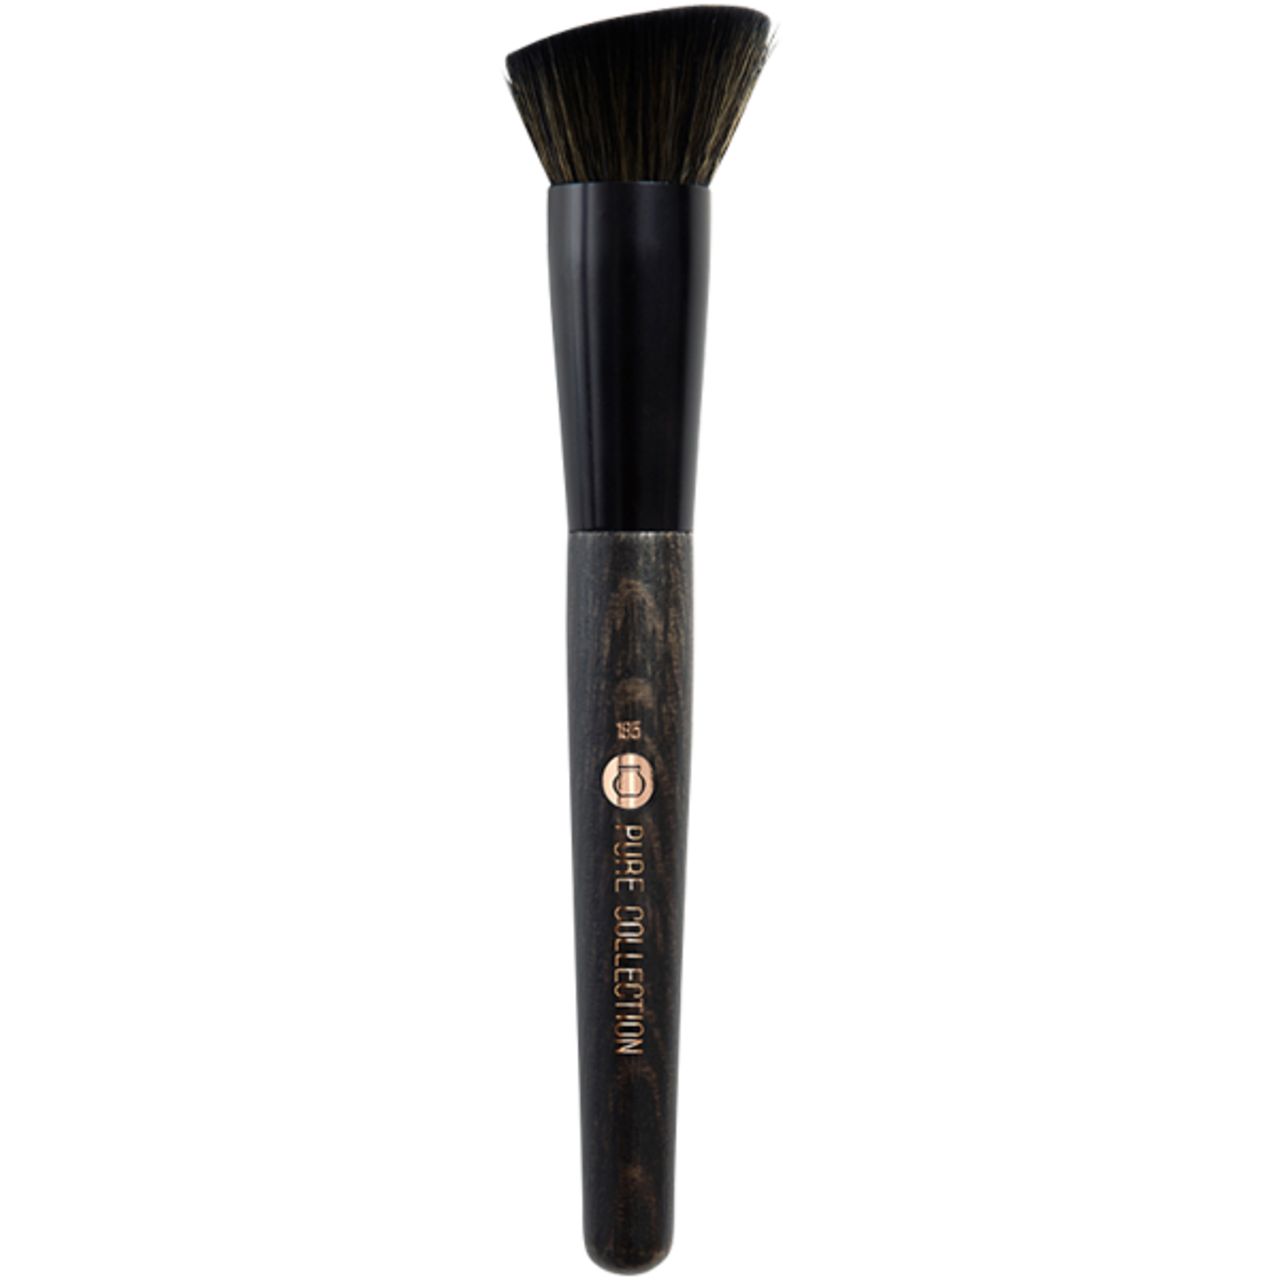 Nilens Jord, Pure Collection Angled Foundation Brush